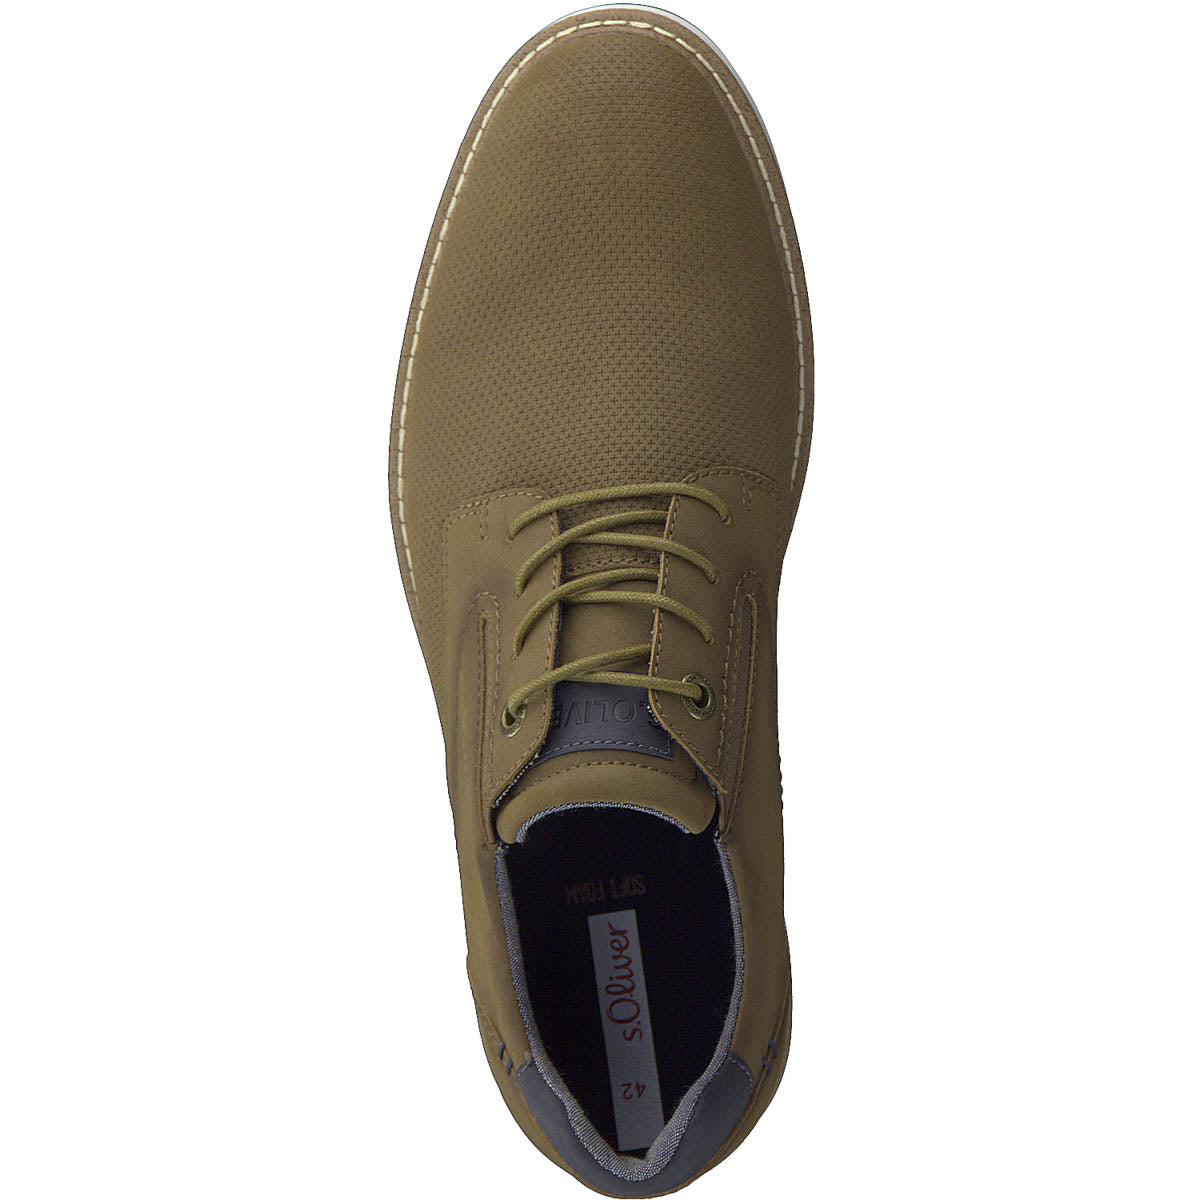 S.Oliver Men's Brown Synthetic Shoes with Elastic Fit and Pin Hole Design